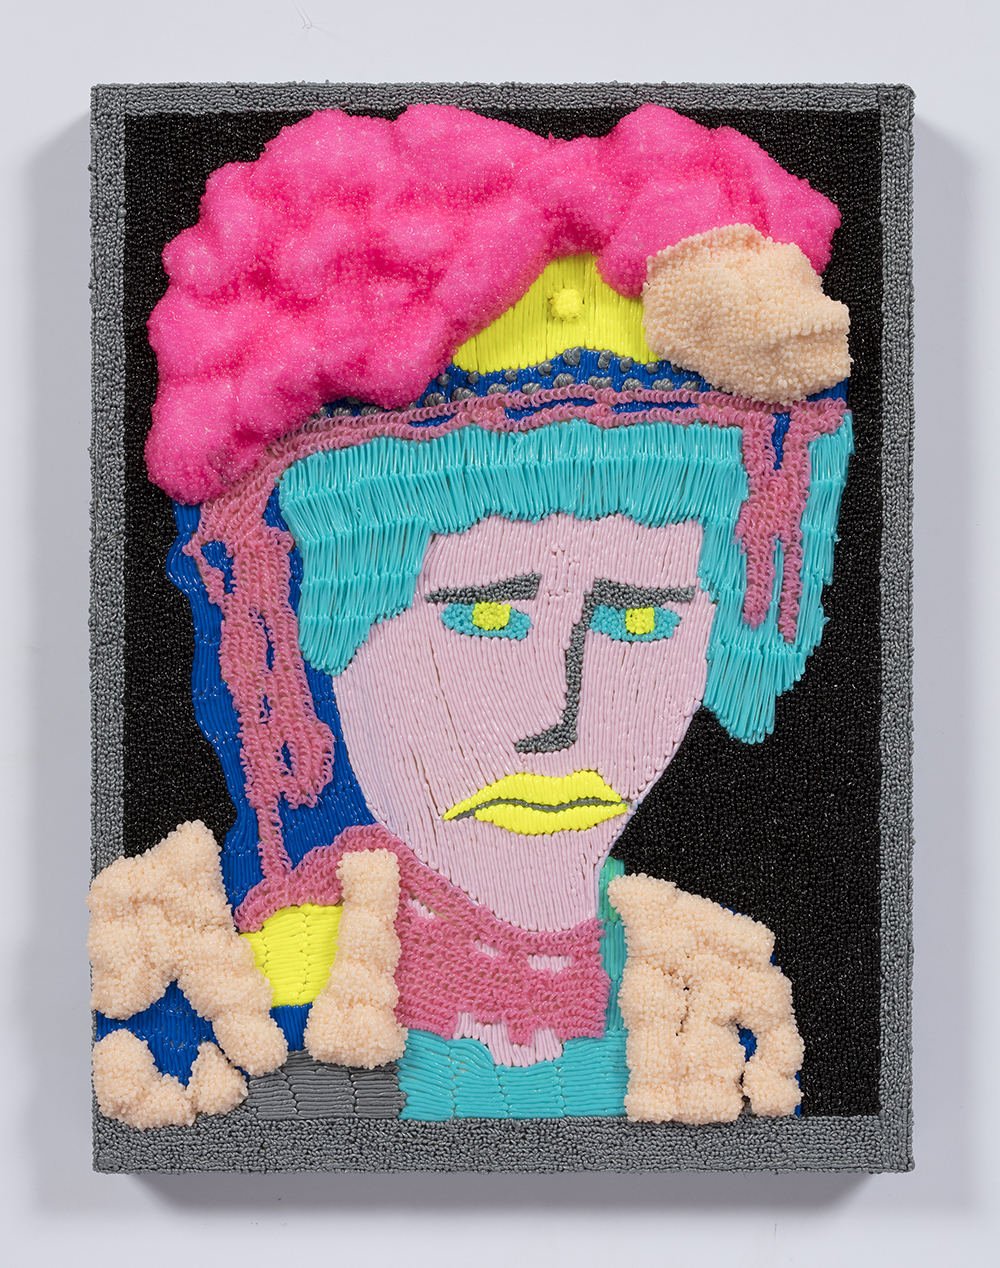 Dominic Dispirito. <em>Pouty pearly</em>, 2018. Manually printed PLA plastic on board, 11 3/4 x 8 1/4 inches  (30 x 21 cm)